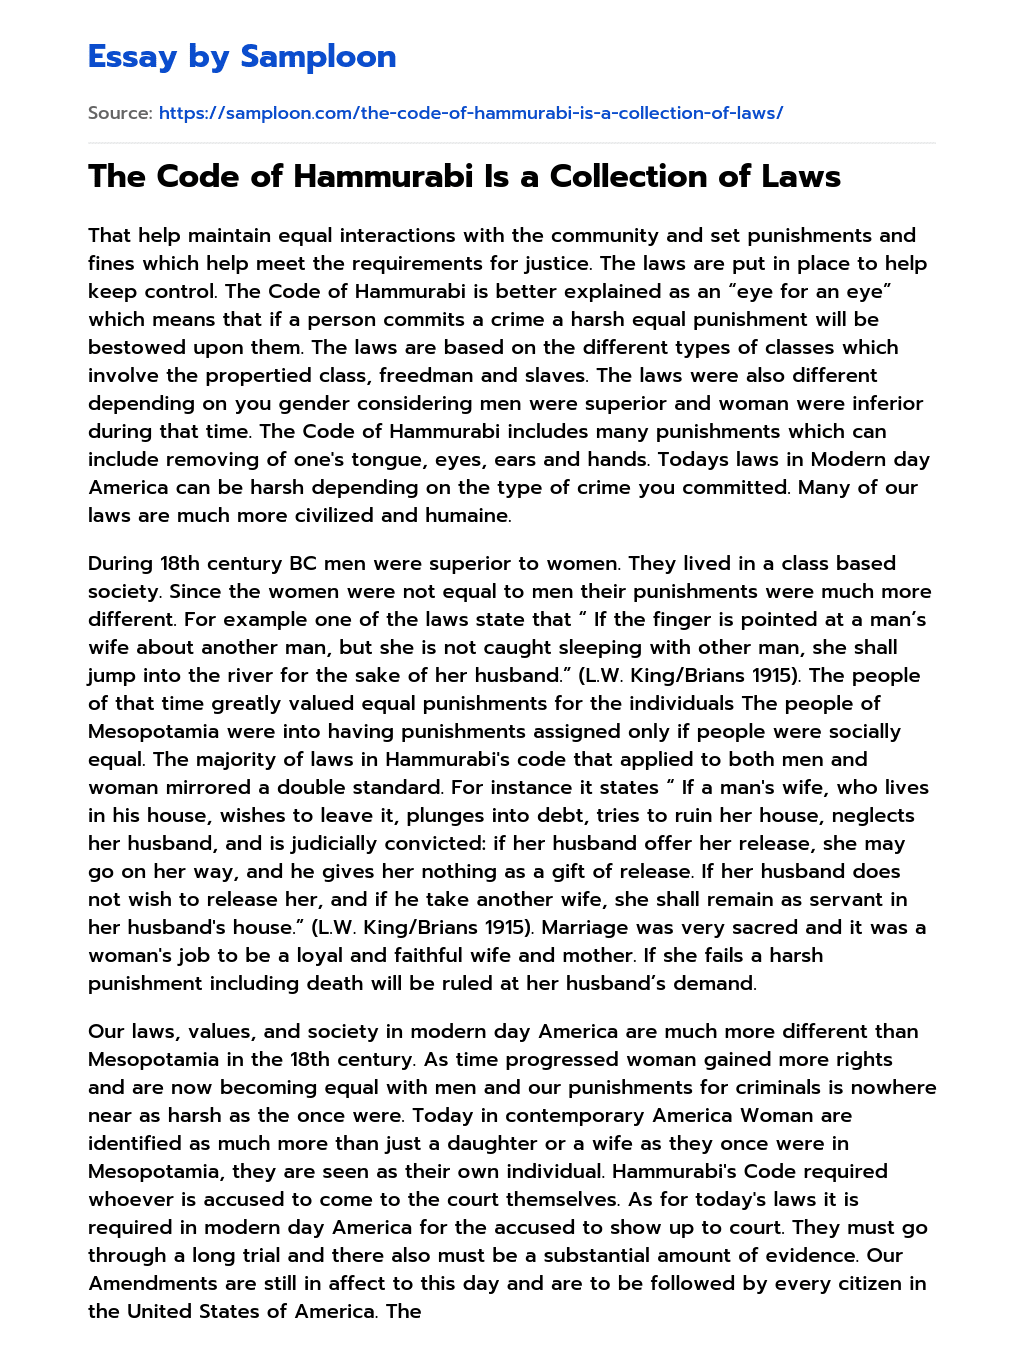 The Code of Hammurabi Is a Collection of Laws essay